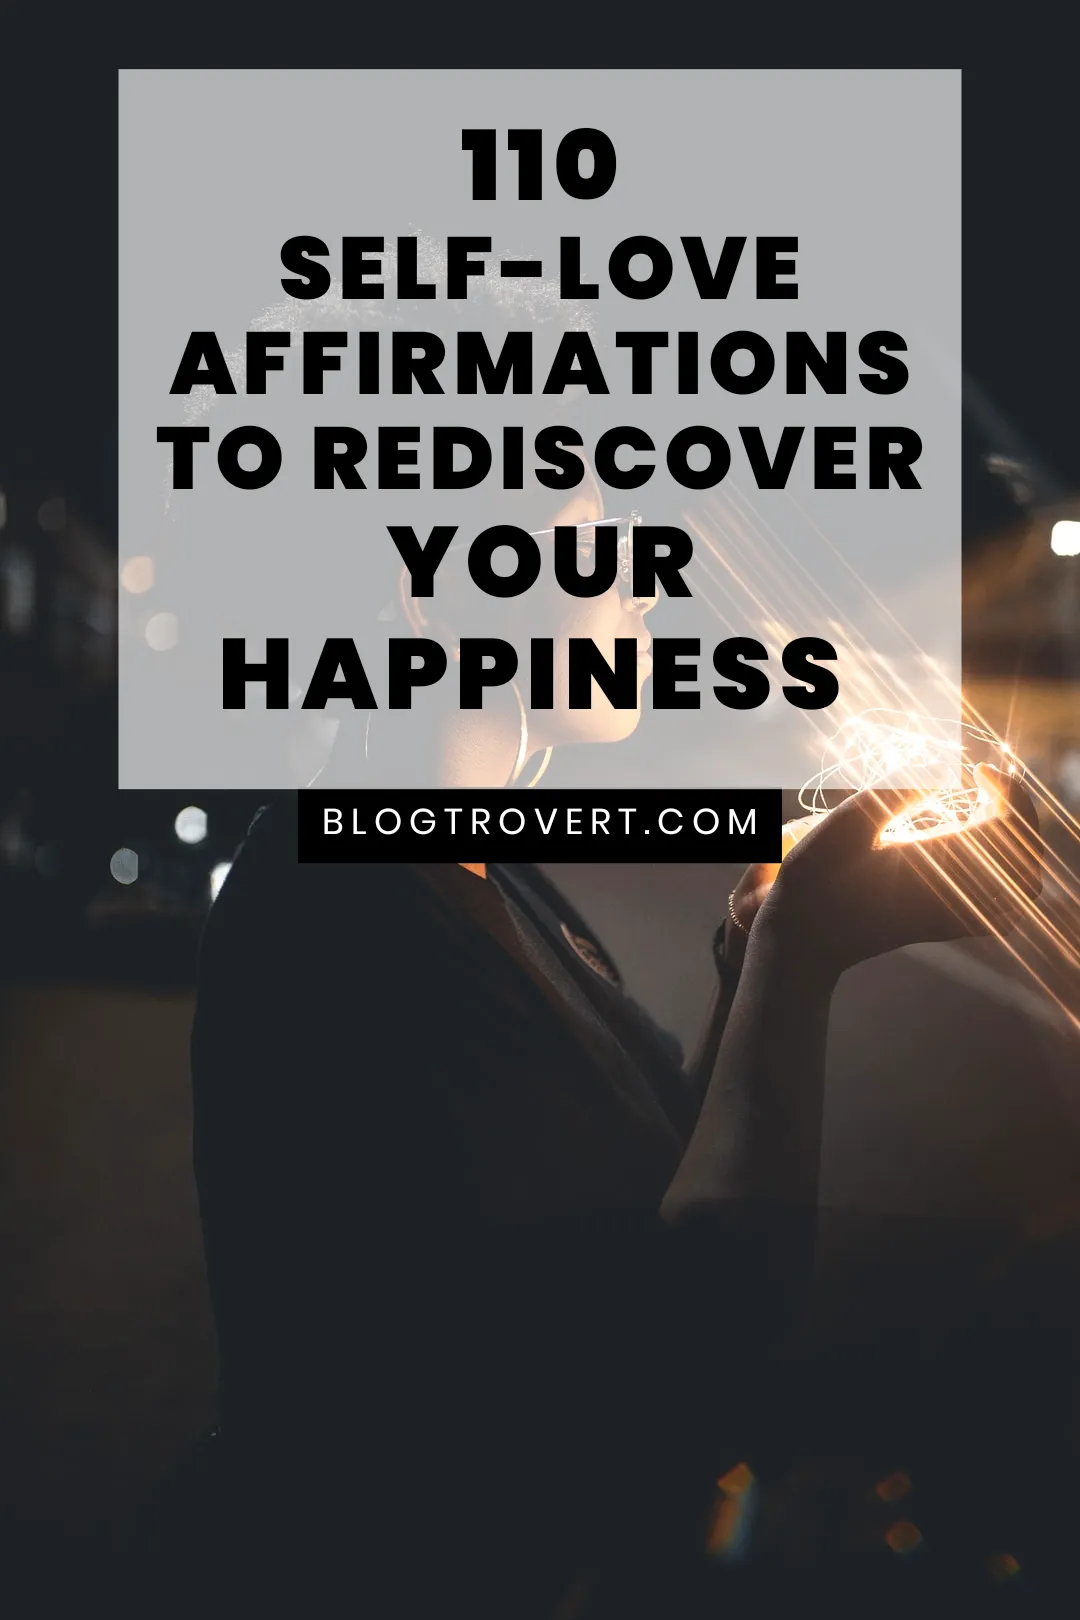 110 powerful affirmations for self-love 3